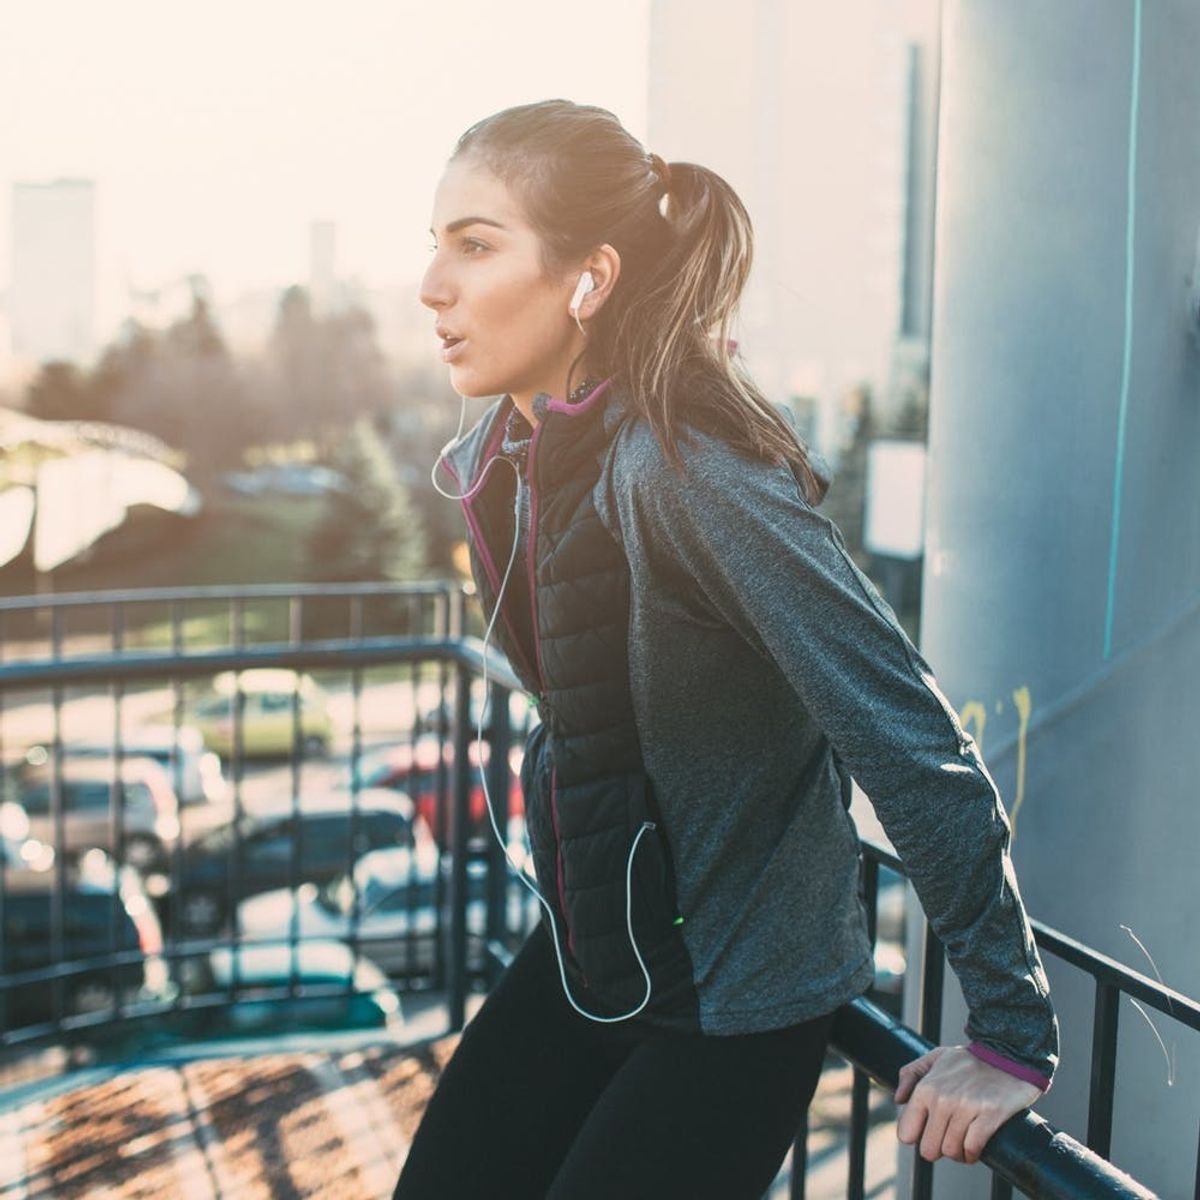 13 Expert Tips to Help You Power Through a New Fitness Routine